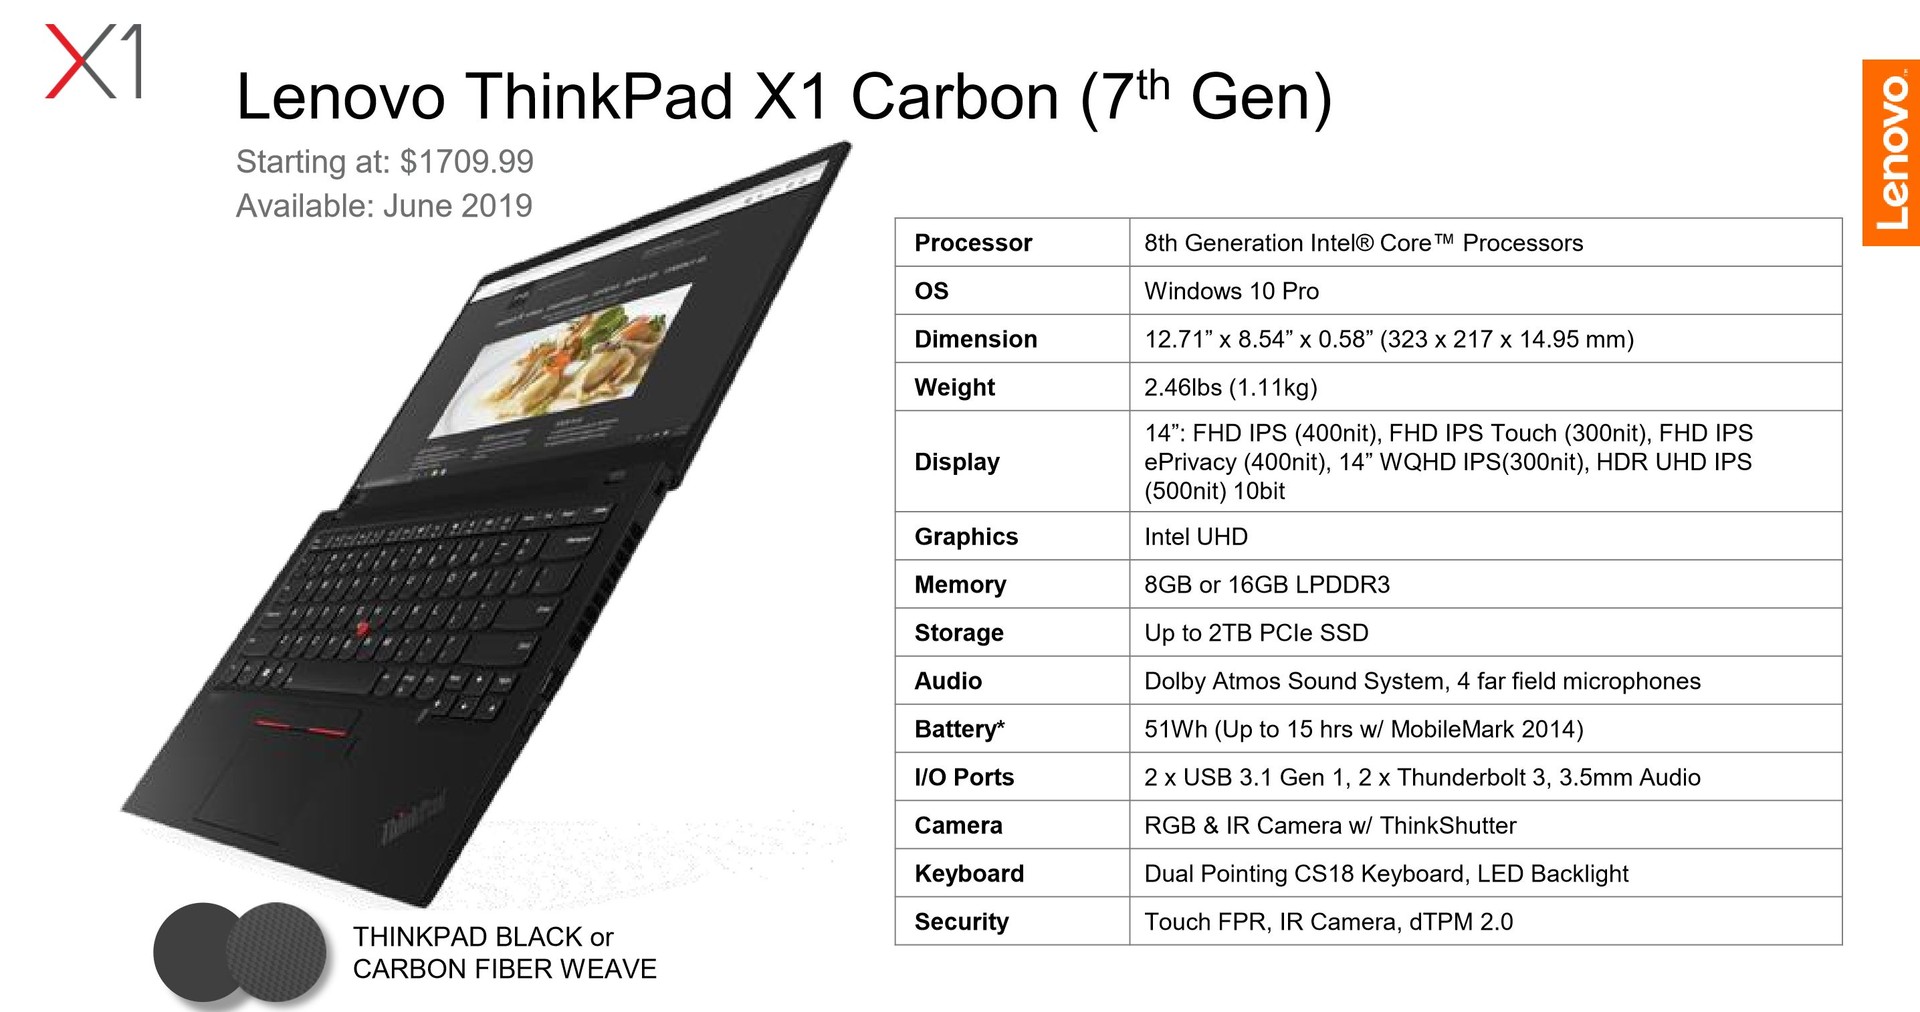 Lenovo ThinkPad X1 Carbon 2019 adds brighter LCDs, better speakers & a